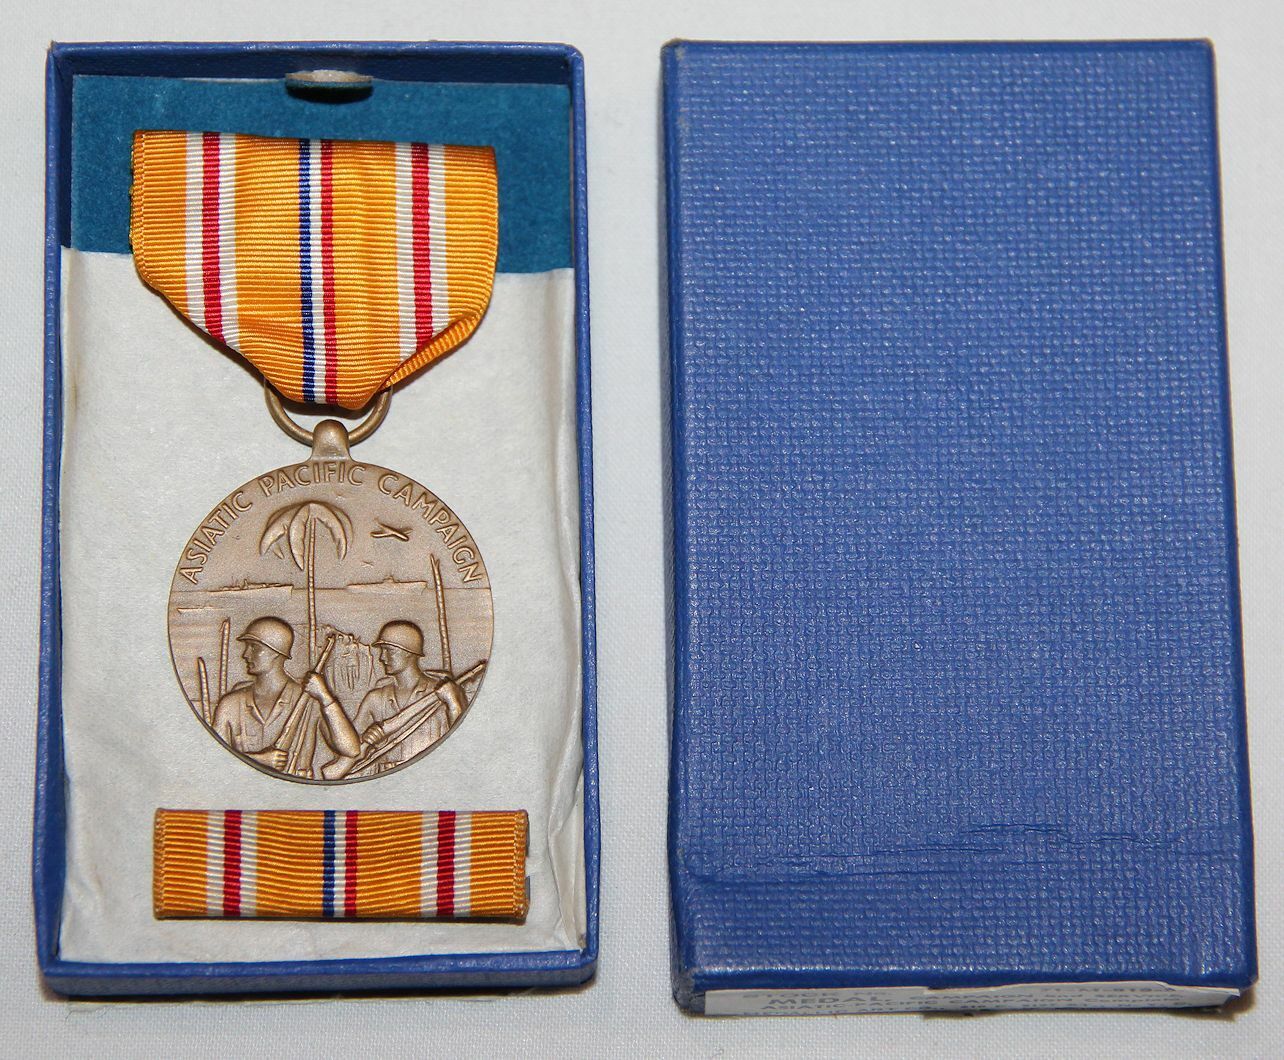 ORIGINAL NEW IN BOX FULL SIZE, WWII ASIATIC-PACIFIC CAMPAIGN MEDAL W/ RIBBON BAR